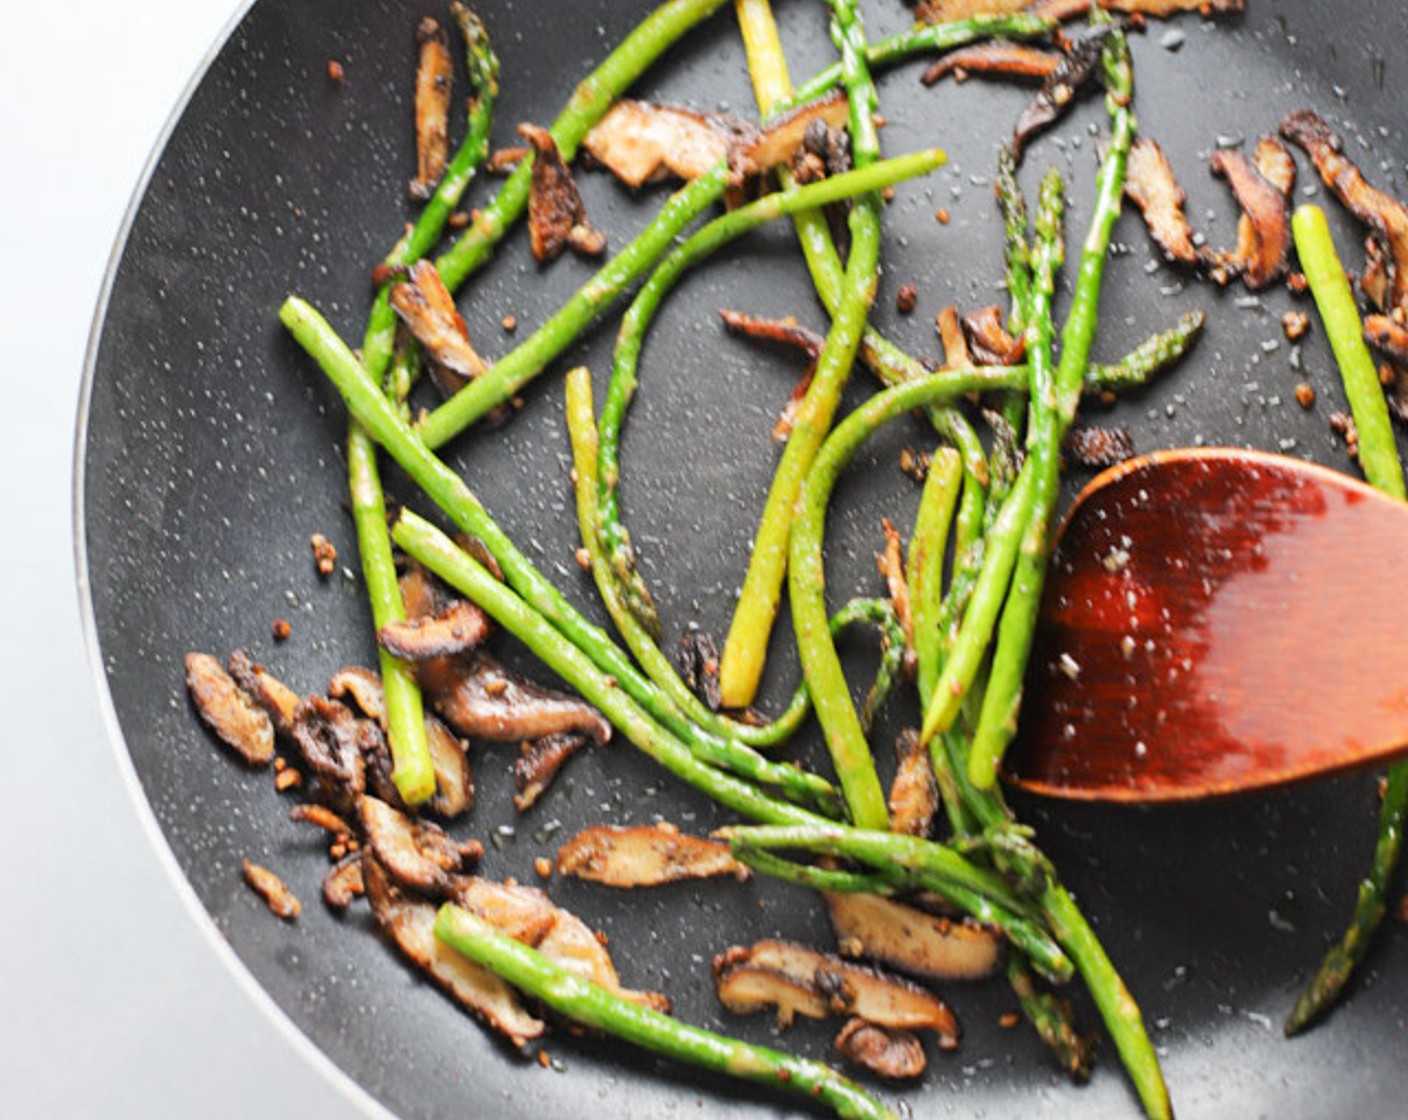 step 2 Put Extra-Virgin Olive Oil (2 Tbsp) in frying pan on medium-high heat. Saute Asparagus (1 handful), Shiitake Mushroom (1 cup), Garlic (1 tsp), Salt (1/4 tsp), and Ground Black Pepper (1/4 tsp) until soft, for about 8 minutes. Remove from heat.